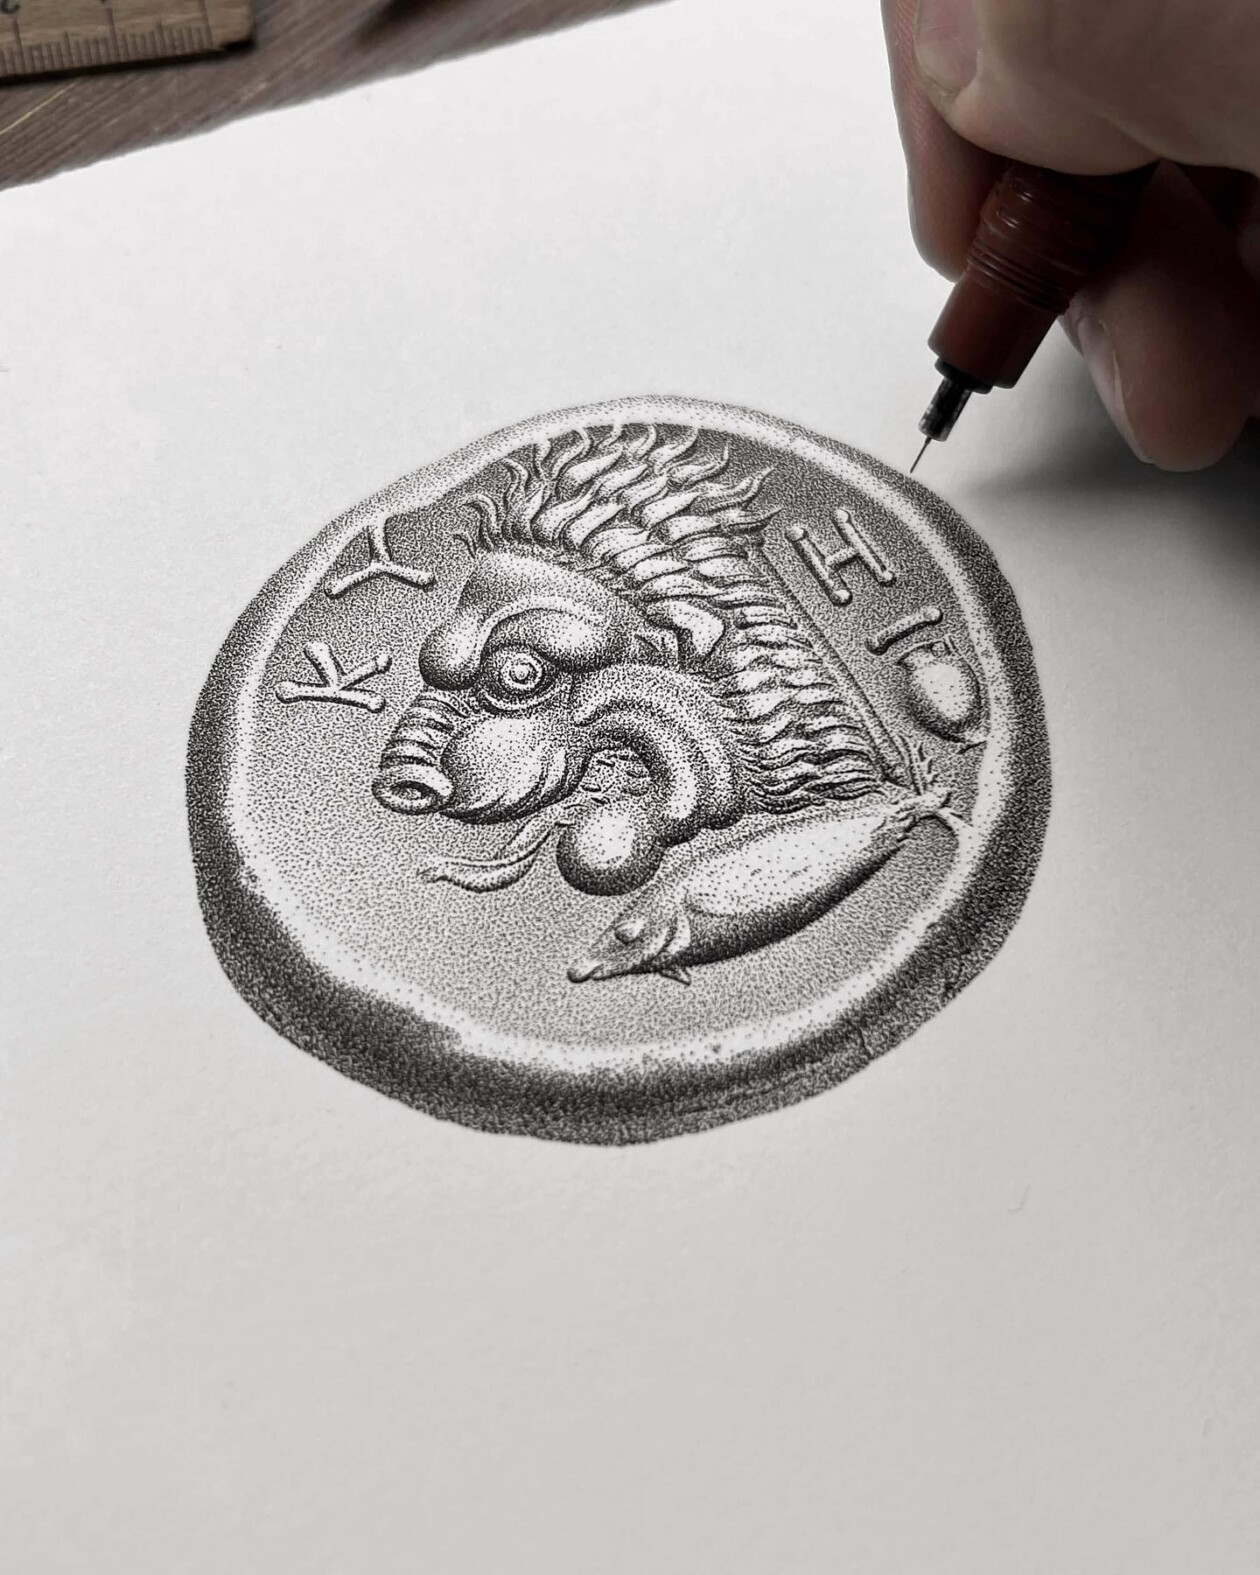 Detailed Stipple Illustrations Made Of Tens Of Millions Of Ink Dots By Xavier Casalta (12)